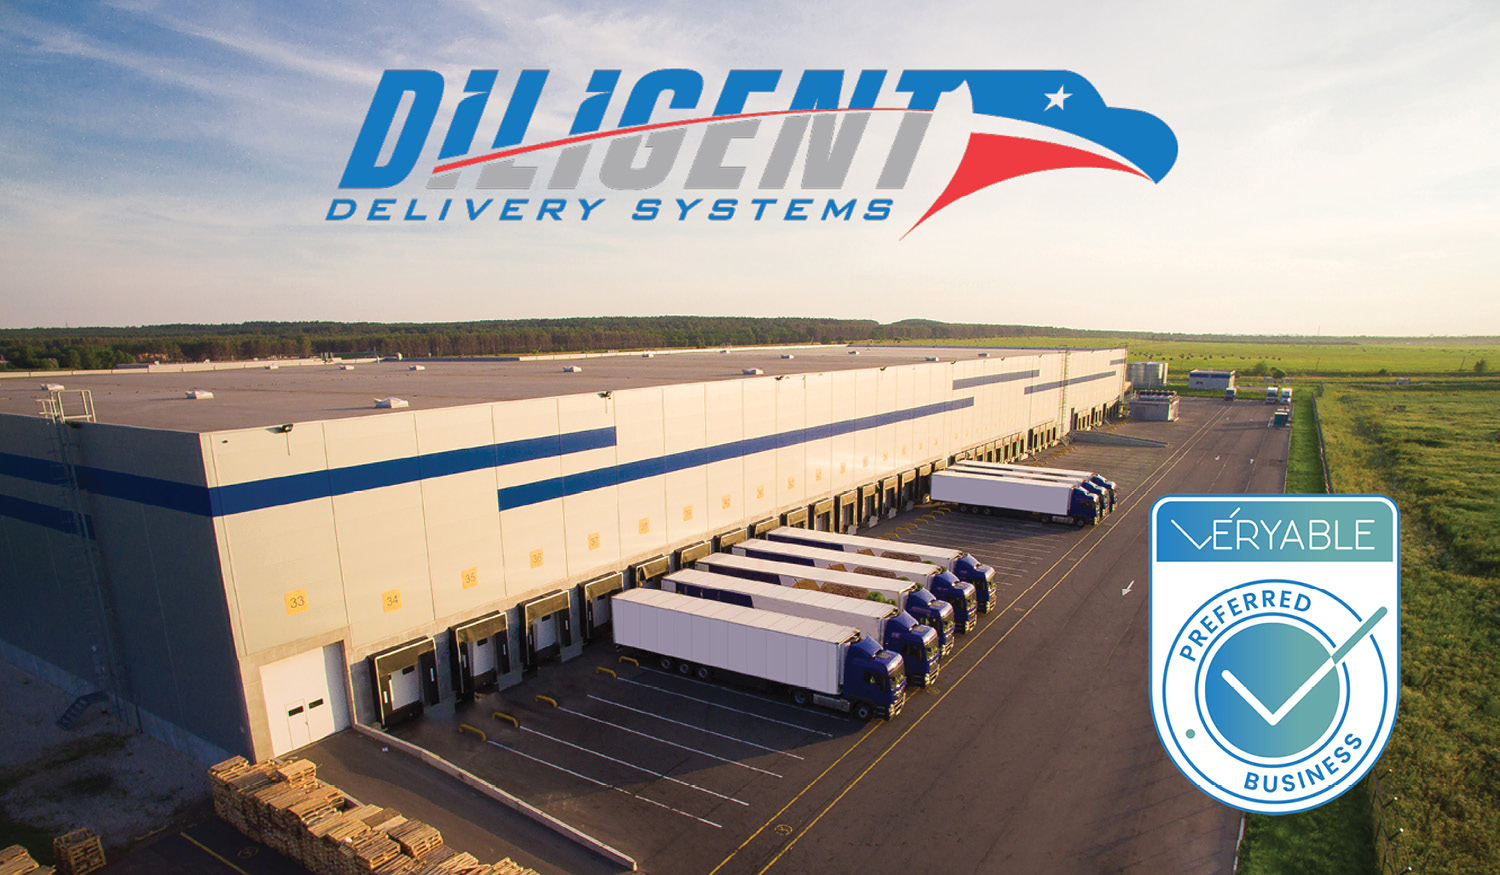 Preferred Business Highlight: Diligent Delivery Systems